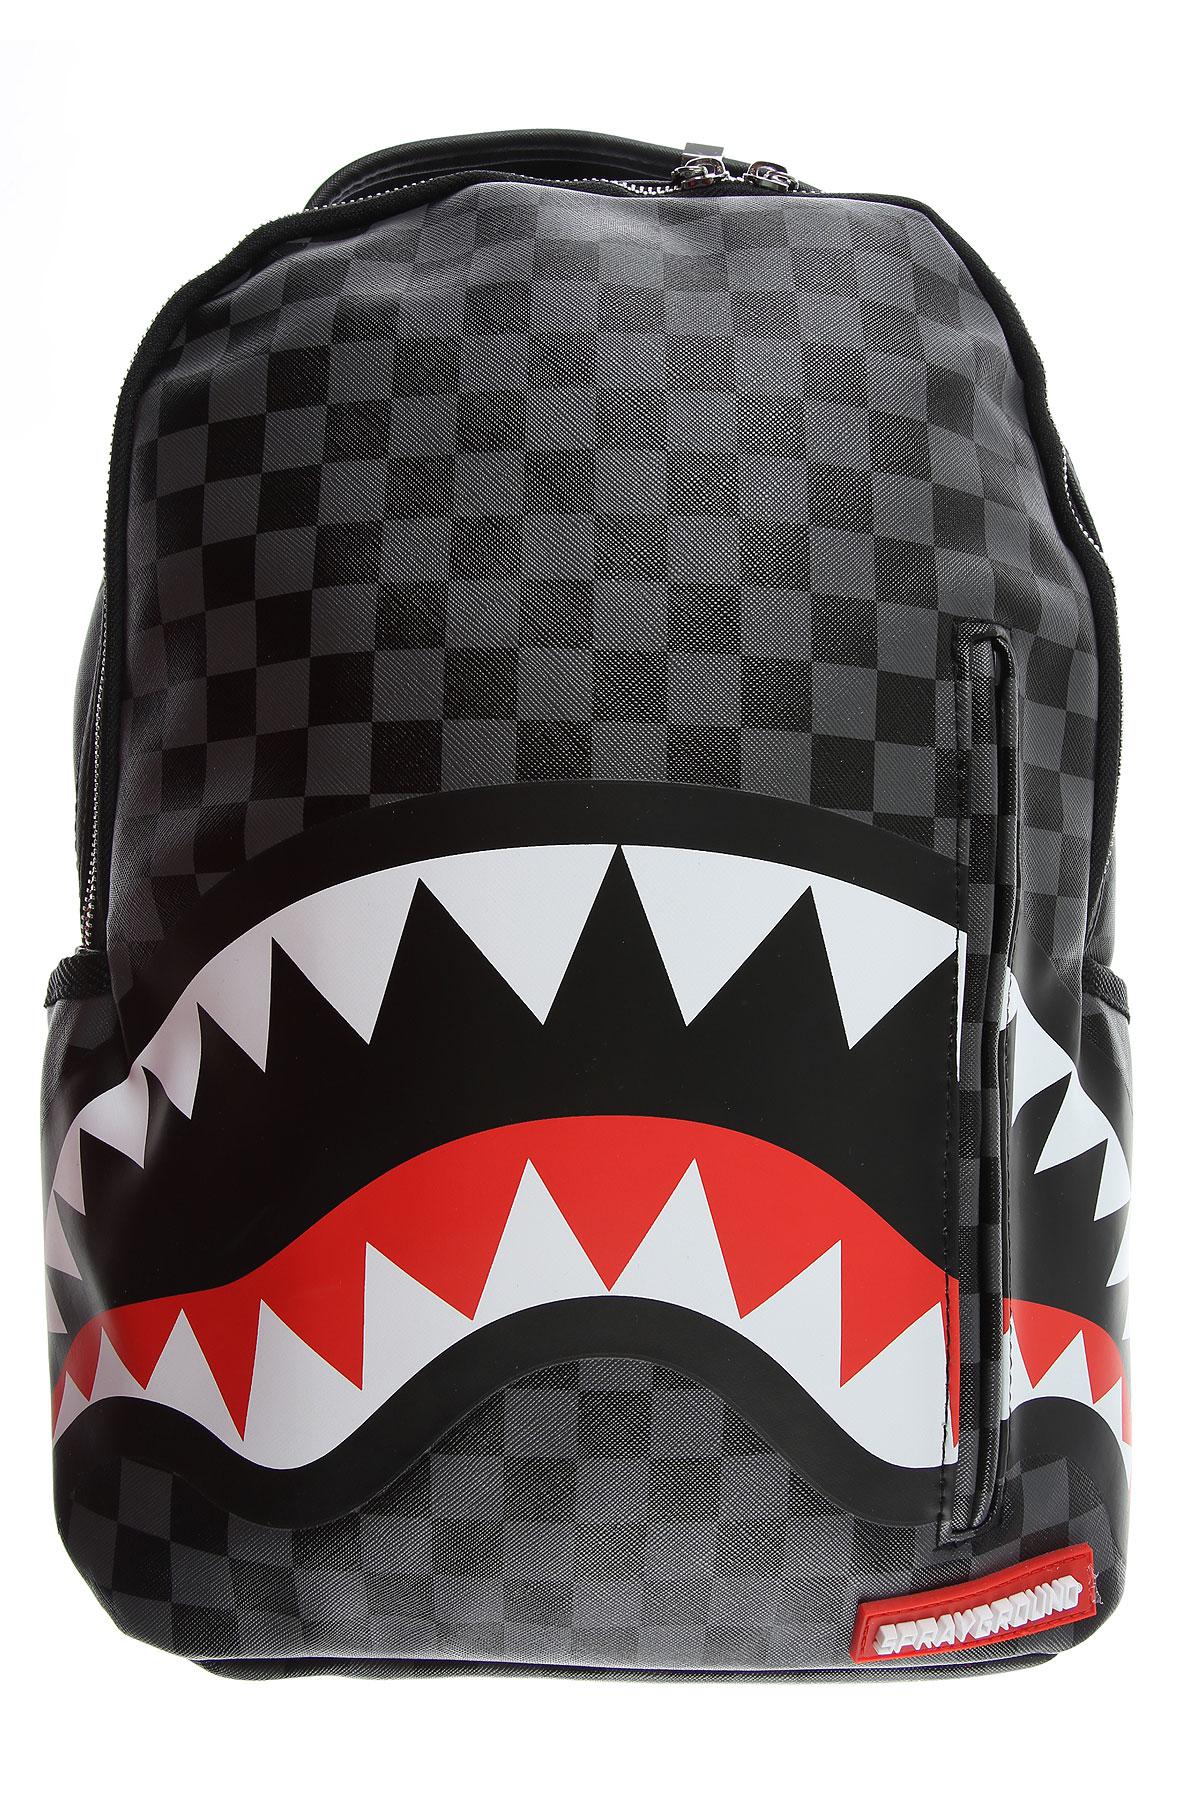 Sprayground Synthetic Sharks In Paris Backpack - Gray Sg1374-gry for Men - Lyst